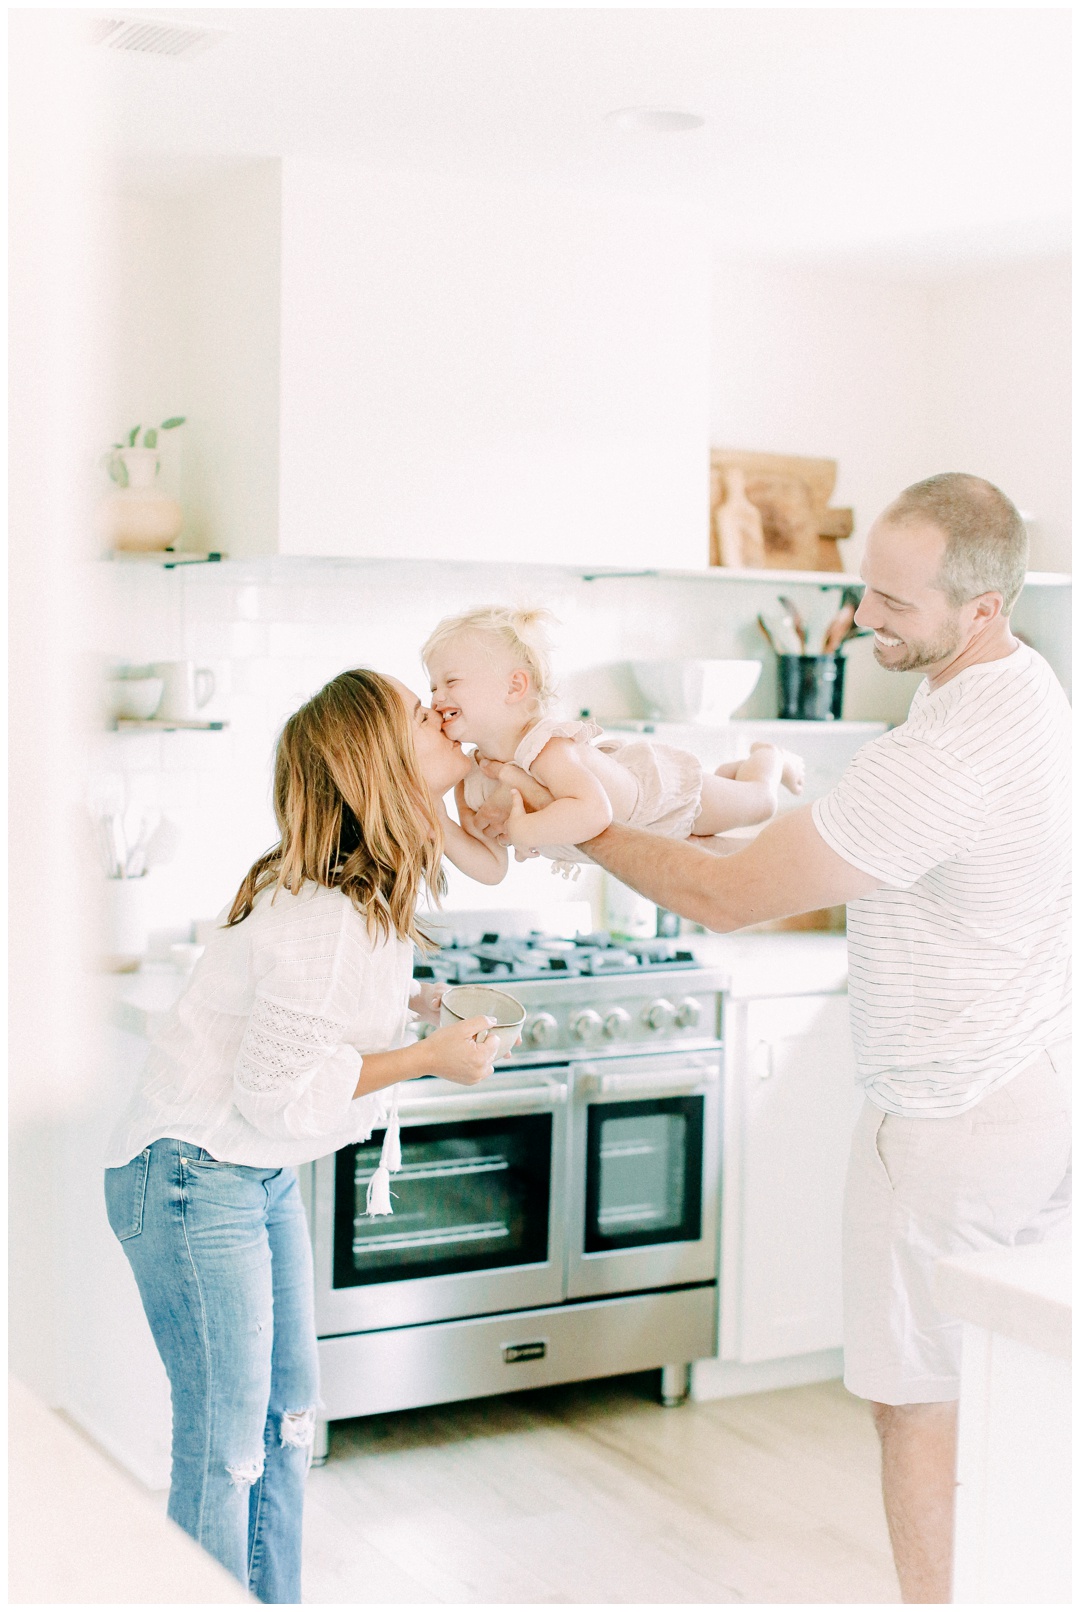 Newport_Beach_Lifestyle_in-Home_Photographer_Newport_Beach_In-Home_Photography_Orange_County_Photographer_Cori_Kleckner_Photography_Orange_County_in-home_Photography_Kristin_Dinsmore_Family_session_1915.jpg